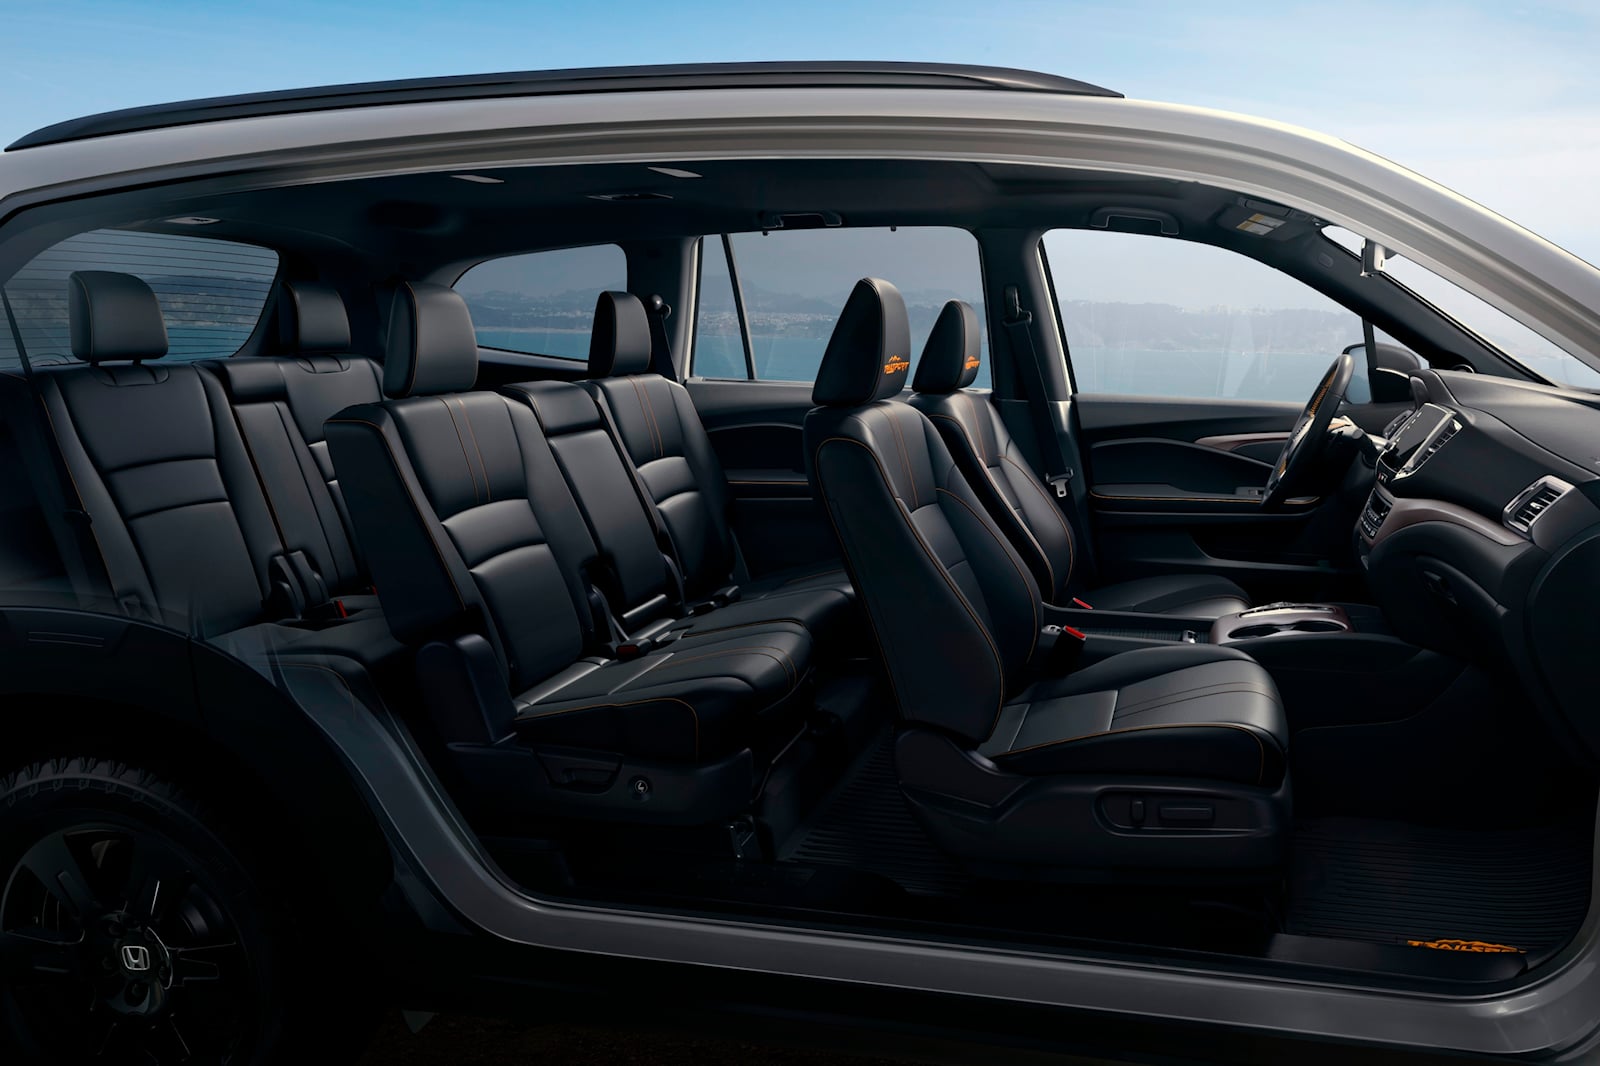 The 2023 Honda Pilot interior from the side